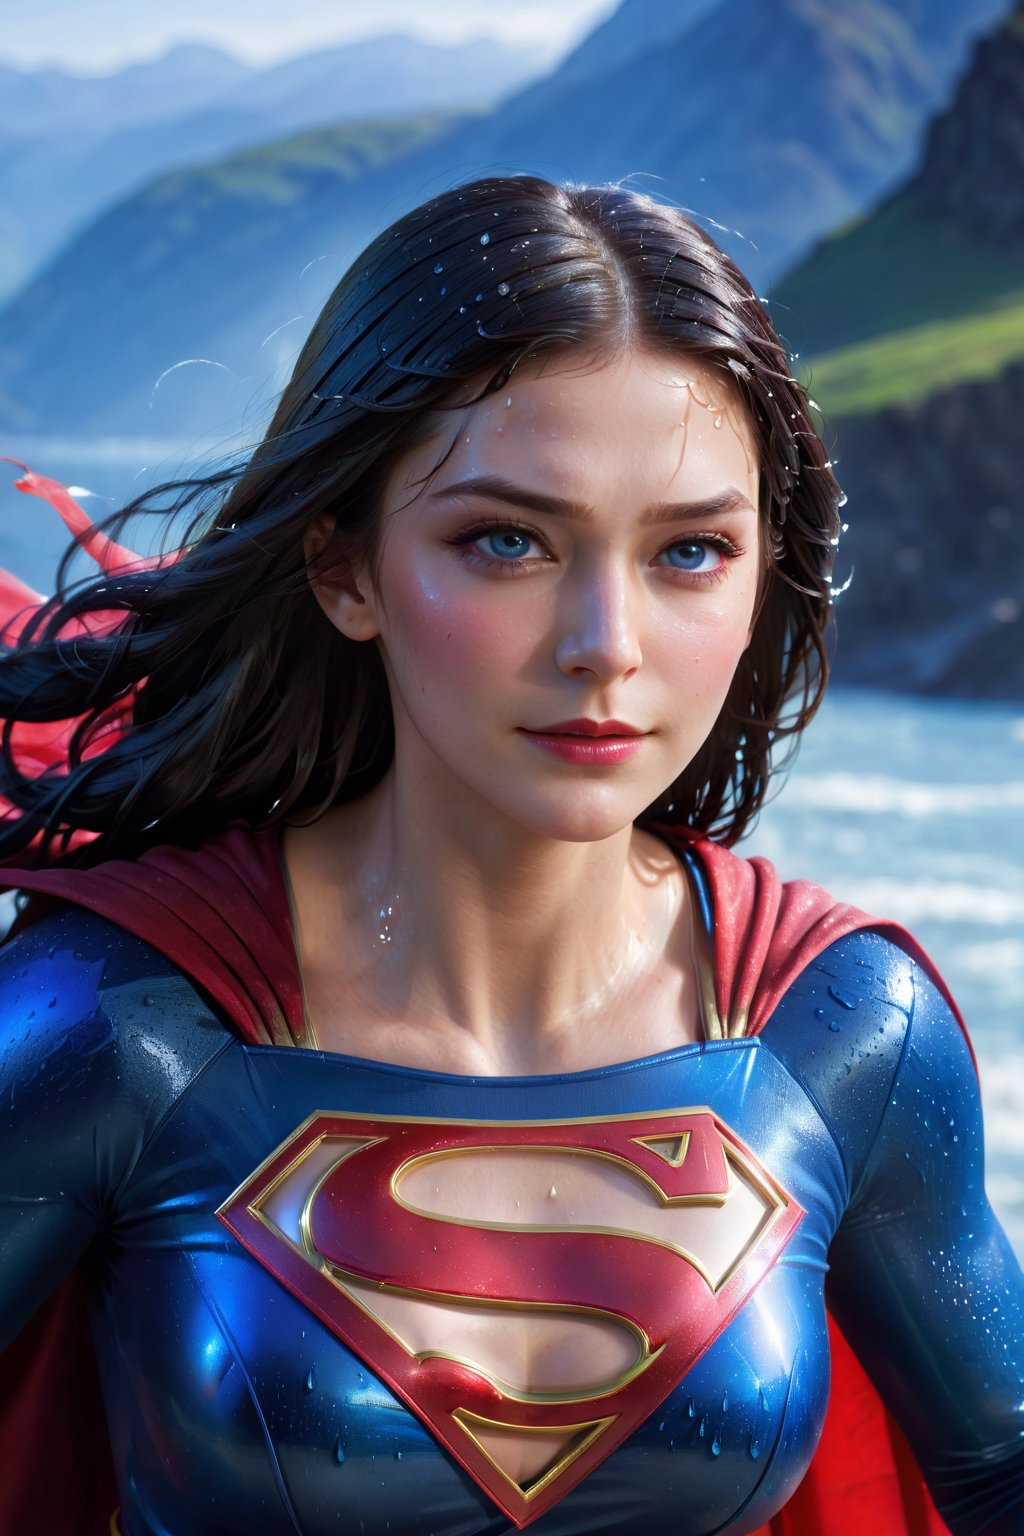 Masterpiece, high quality, Ultra HD, high detailed, supergirl, black costume, water drops on skin, colors dancing in the background, 4k, 8k, top lighting, mountain range background, long flowing black hair, large muscles, cute face, red cape, blue eyes, gazing into the camera , More Detail